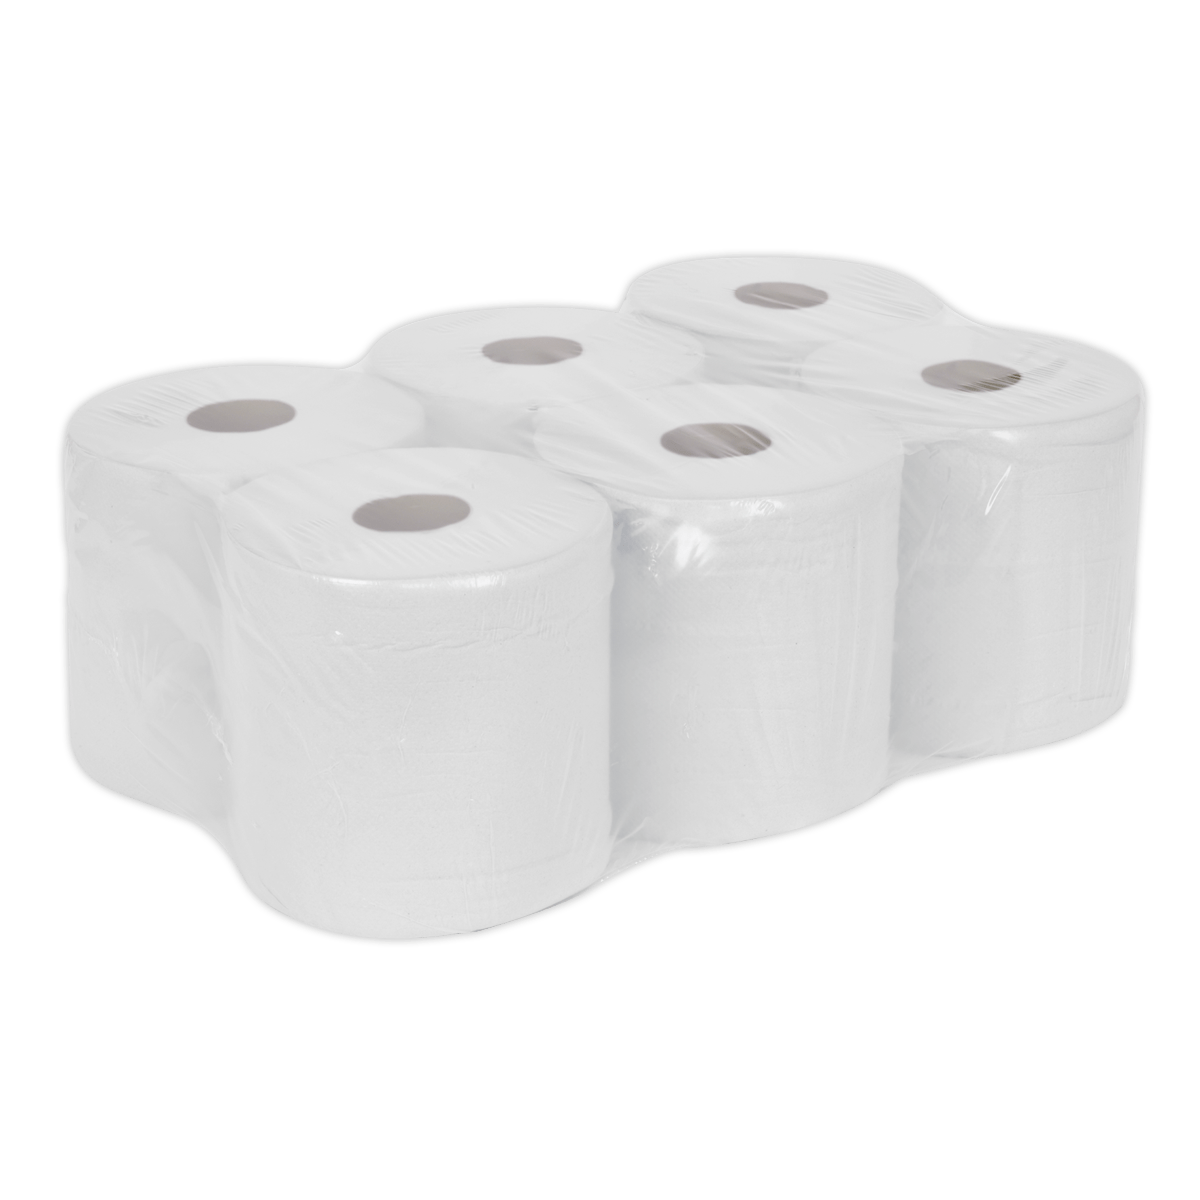 Sealey Paper Roll White 2-Ply Embossed 150m Pack of 6 WHT150